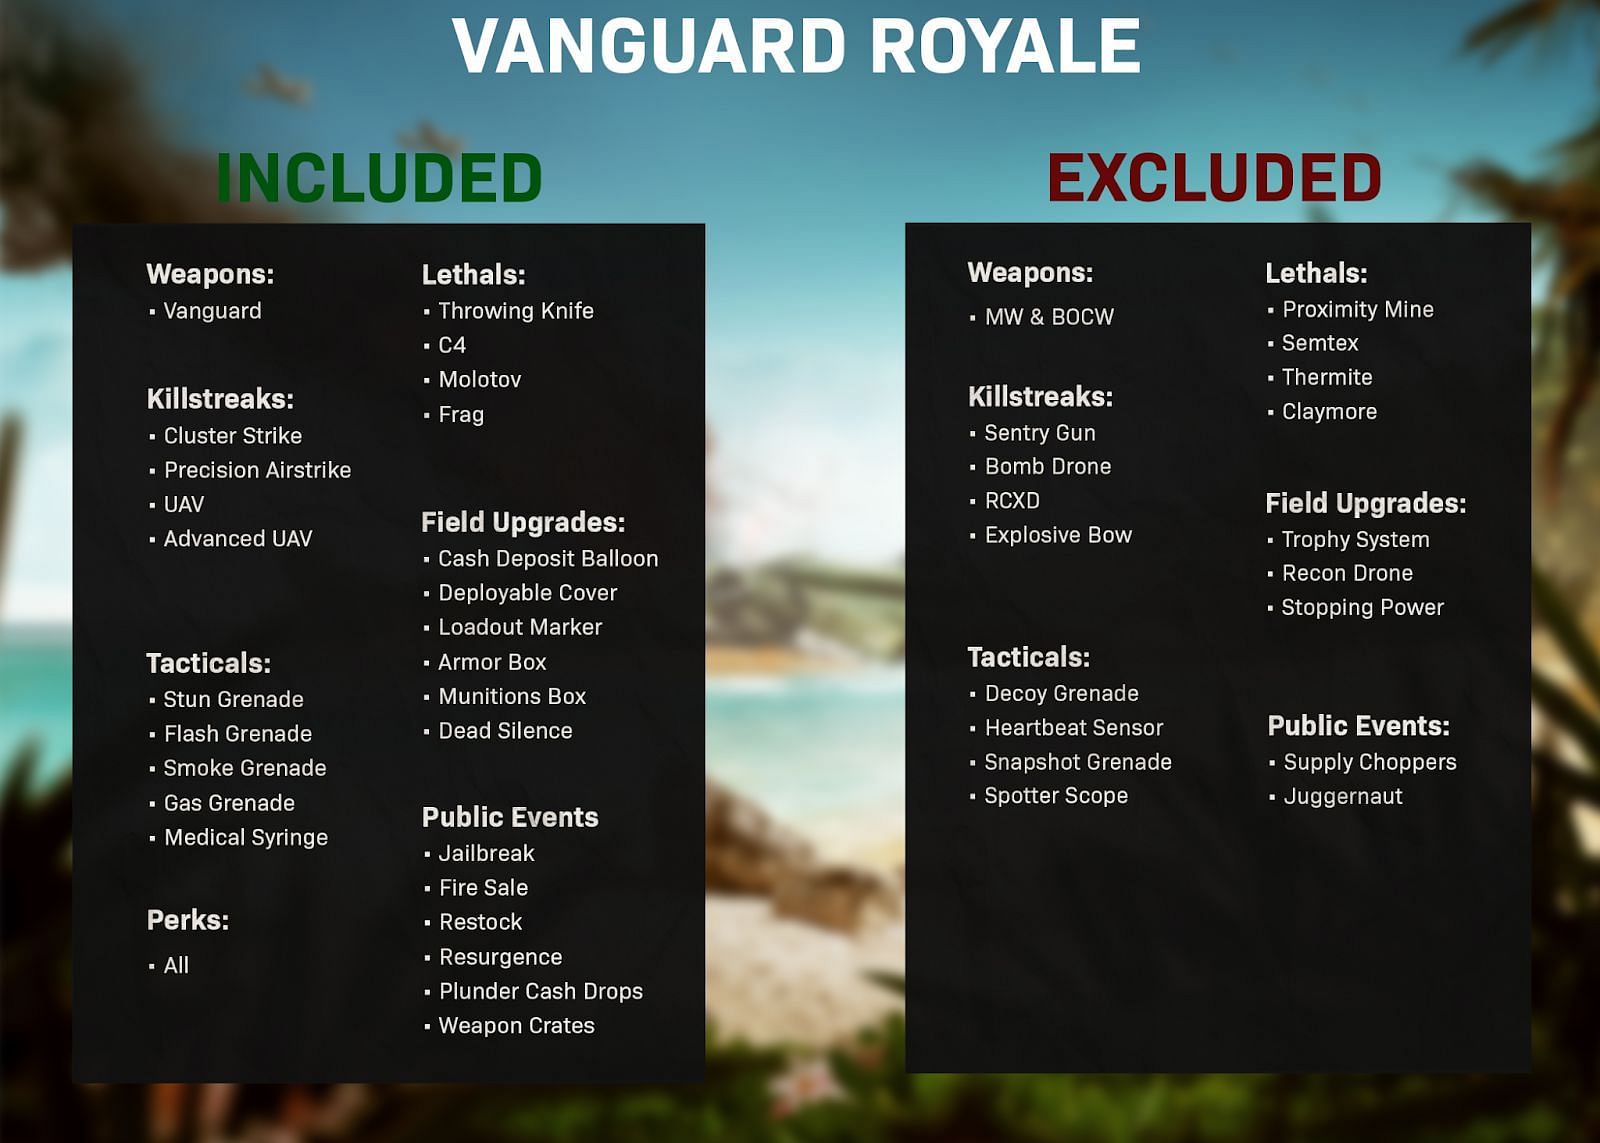 Vanguard Royale (Image by Activision)